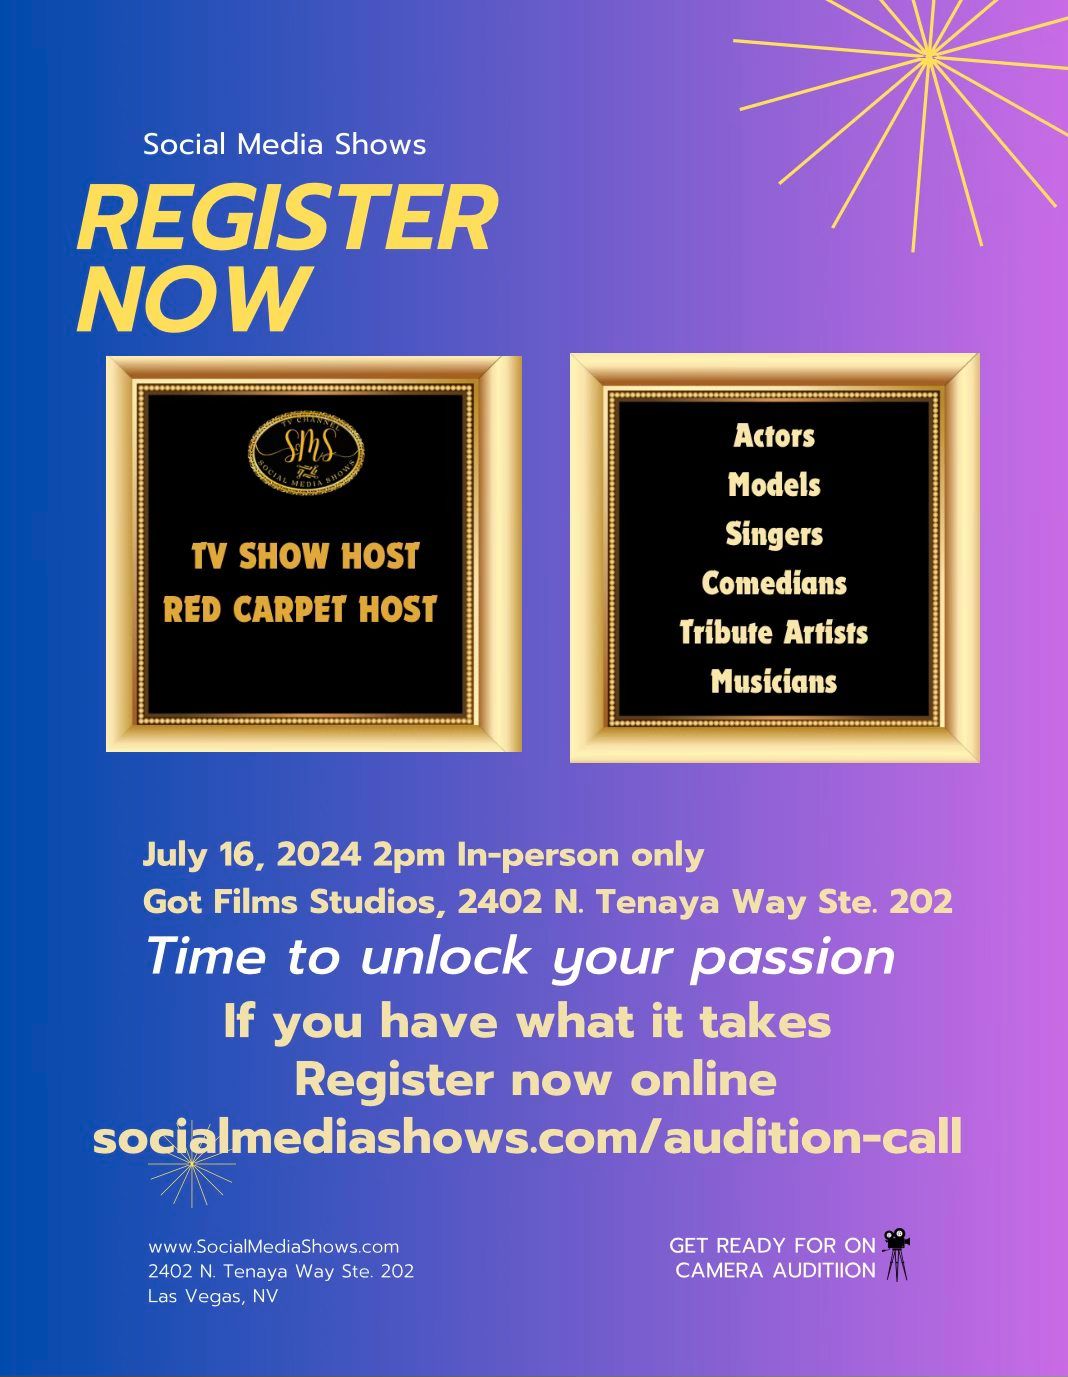 Audition Call - Register Now